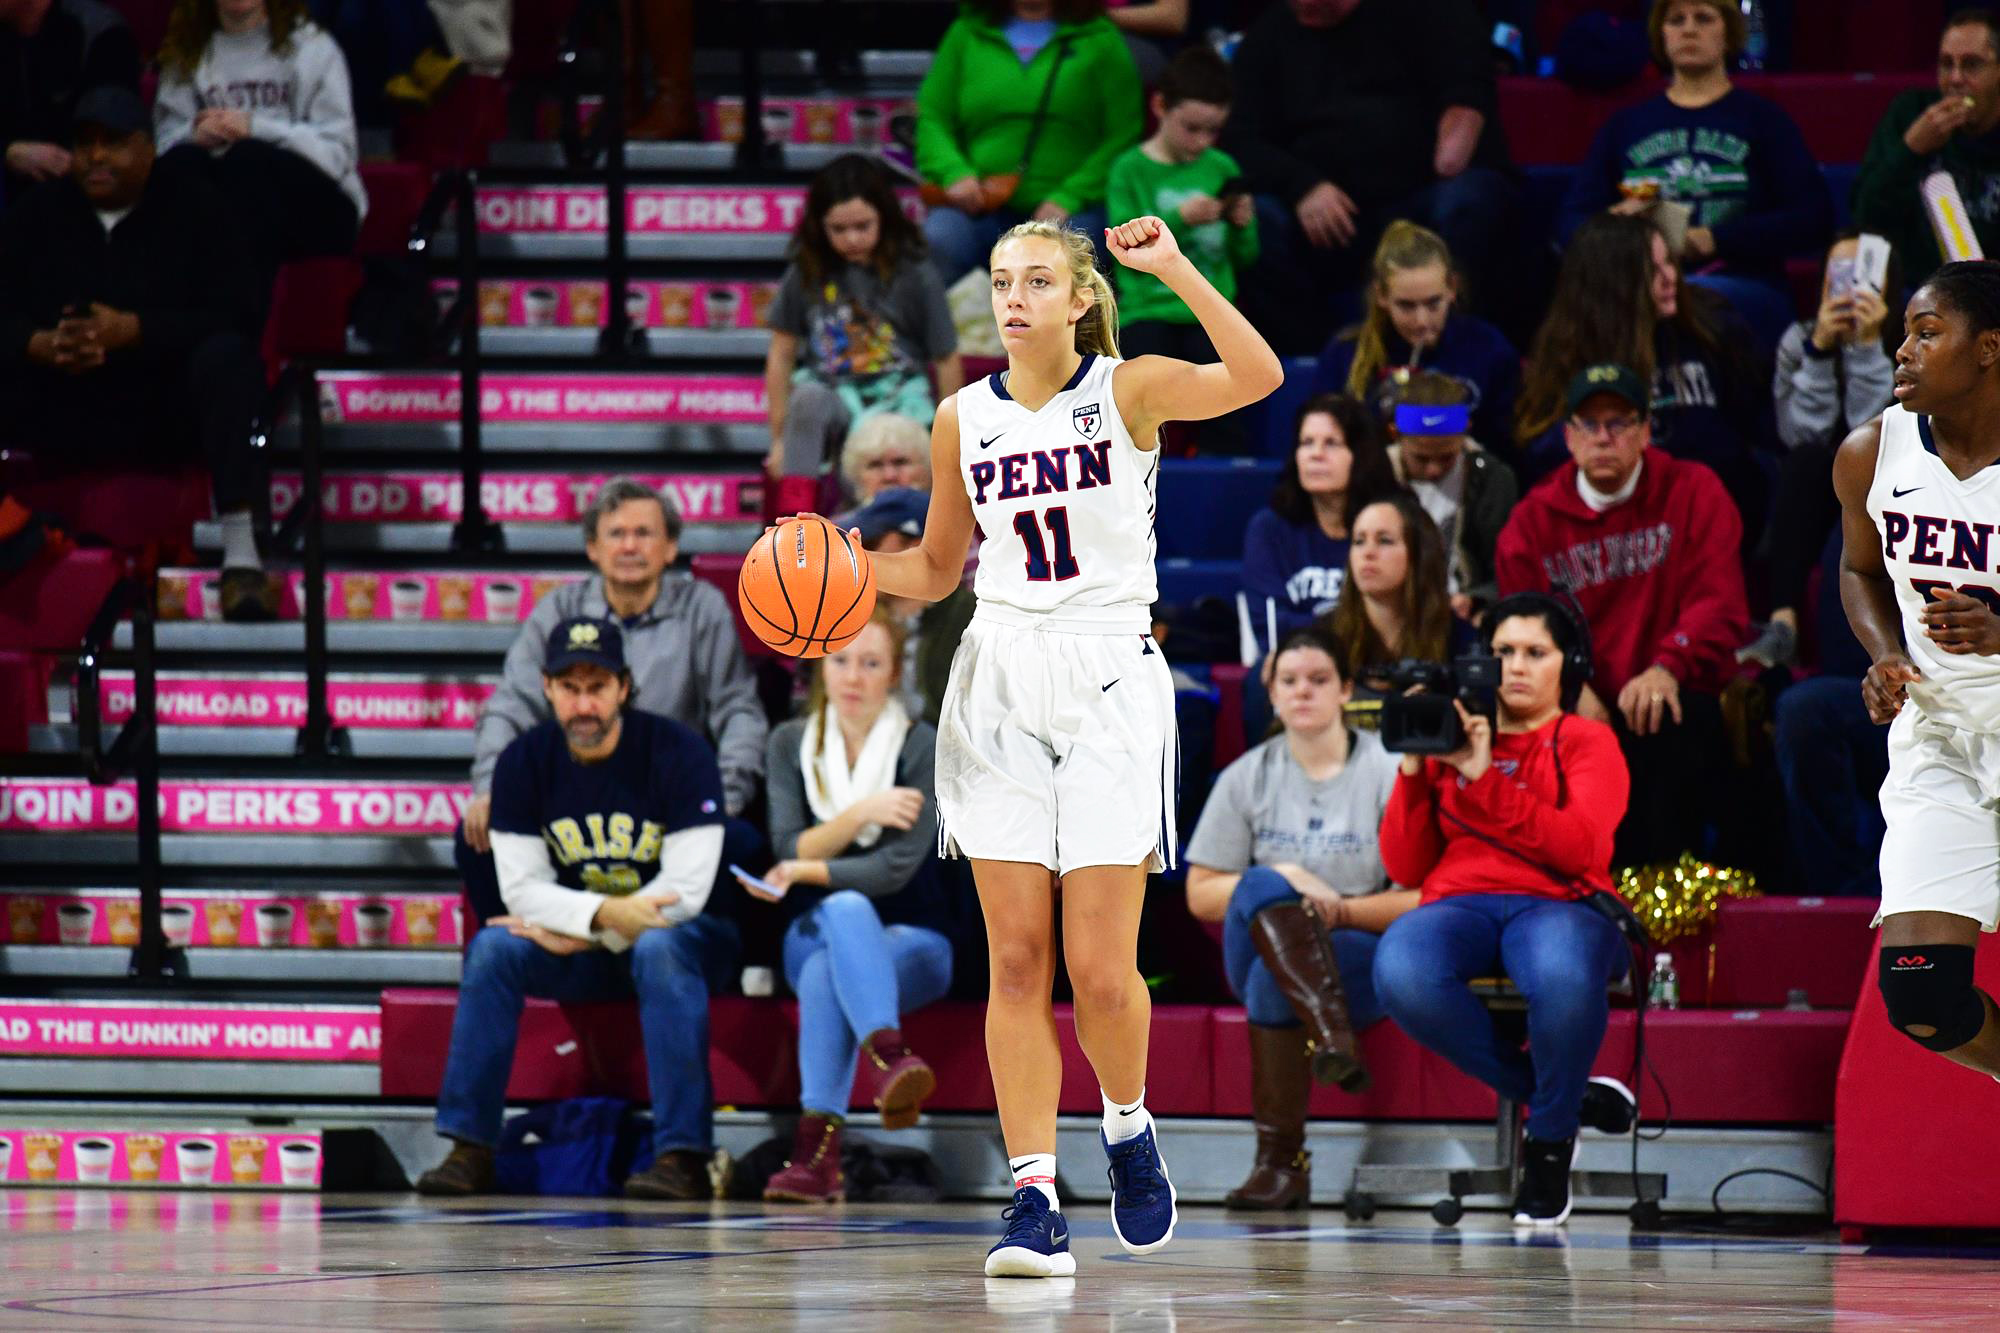 Junior guard Kendall Grasela dribbles up the court during a game at the Palestra.